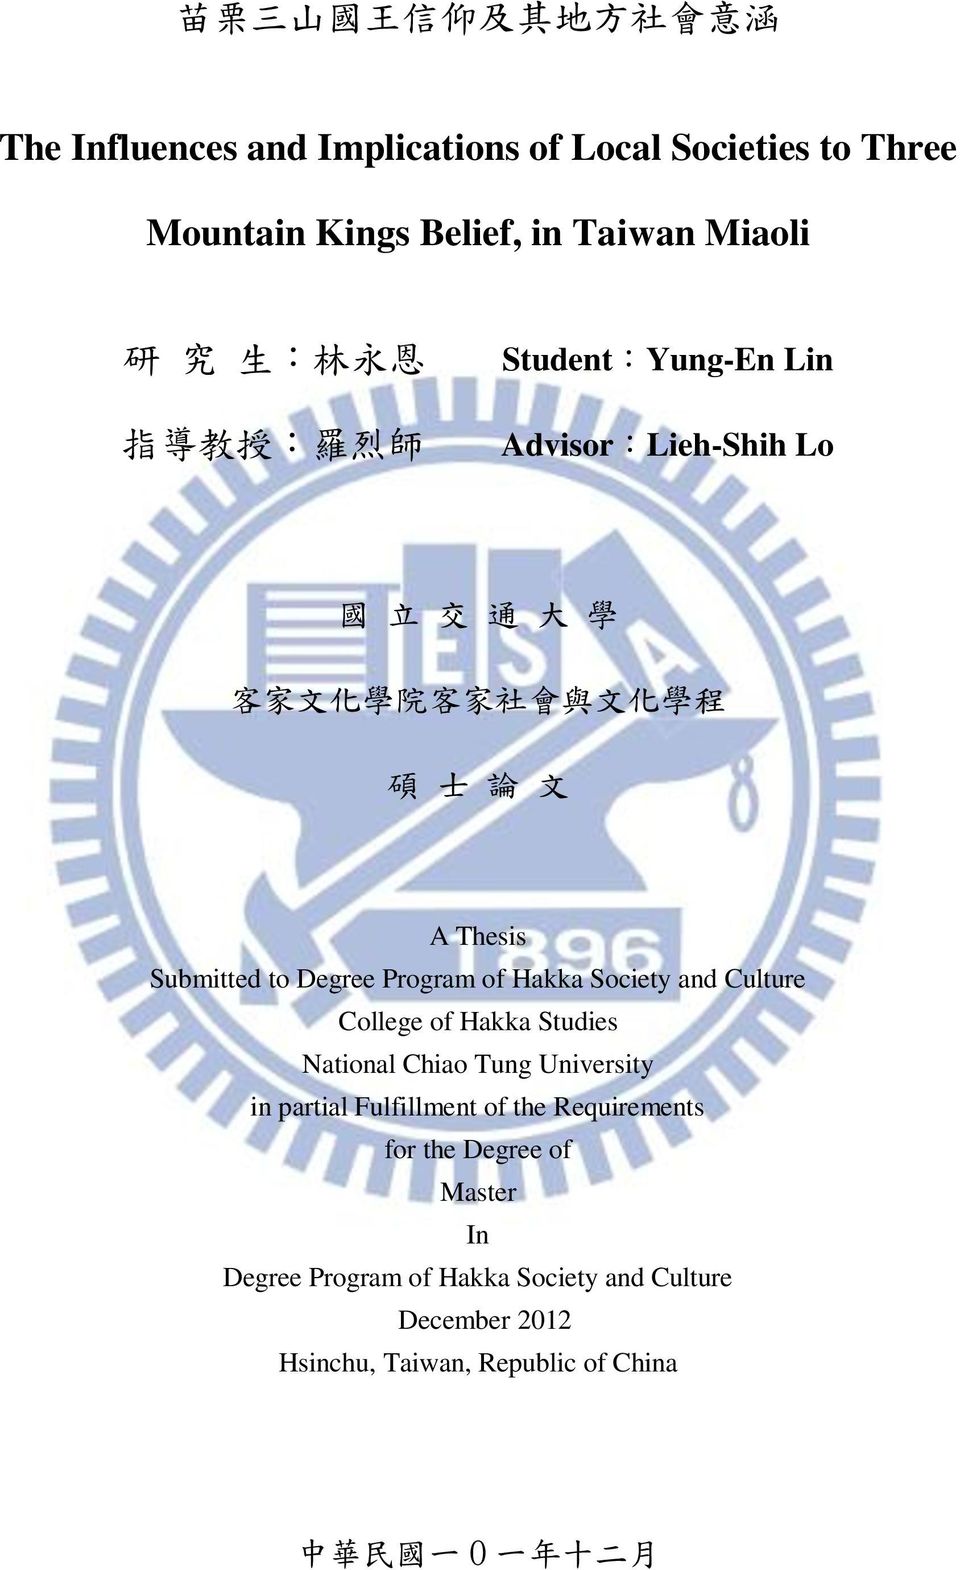 Degree Program of Hakka Society and Culture College of Hakka Studies National Chiao Tung University in partial Fulfillment of the